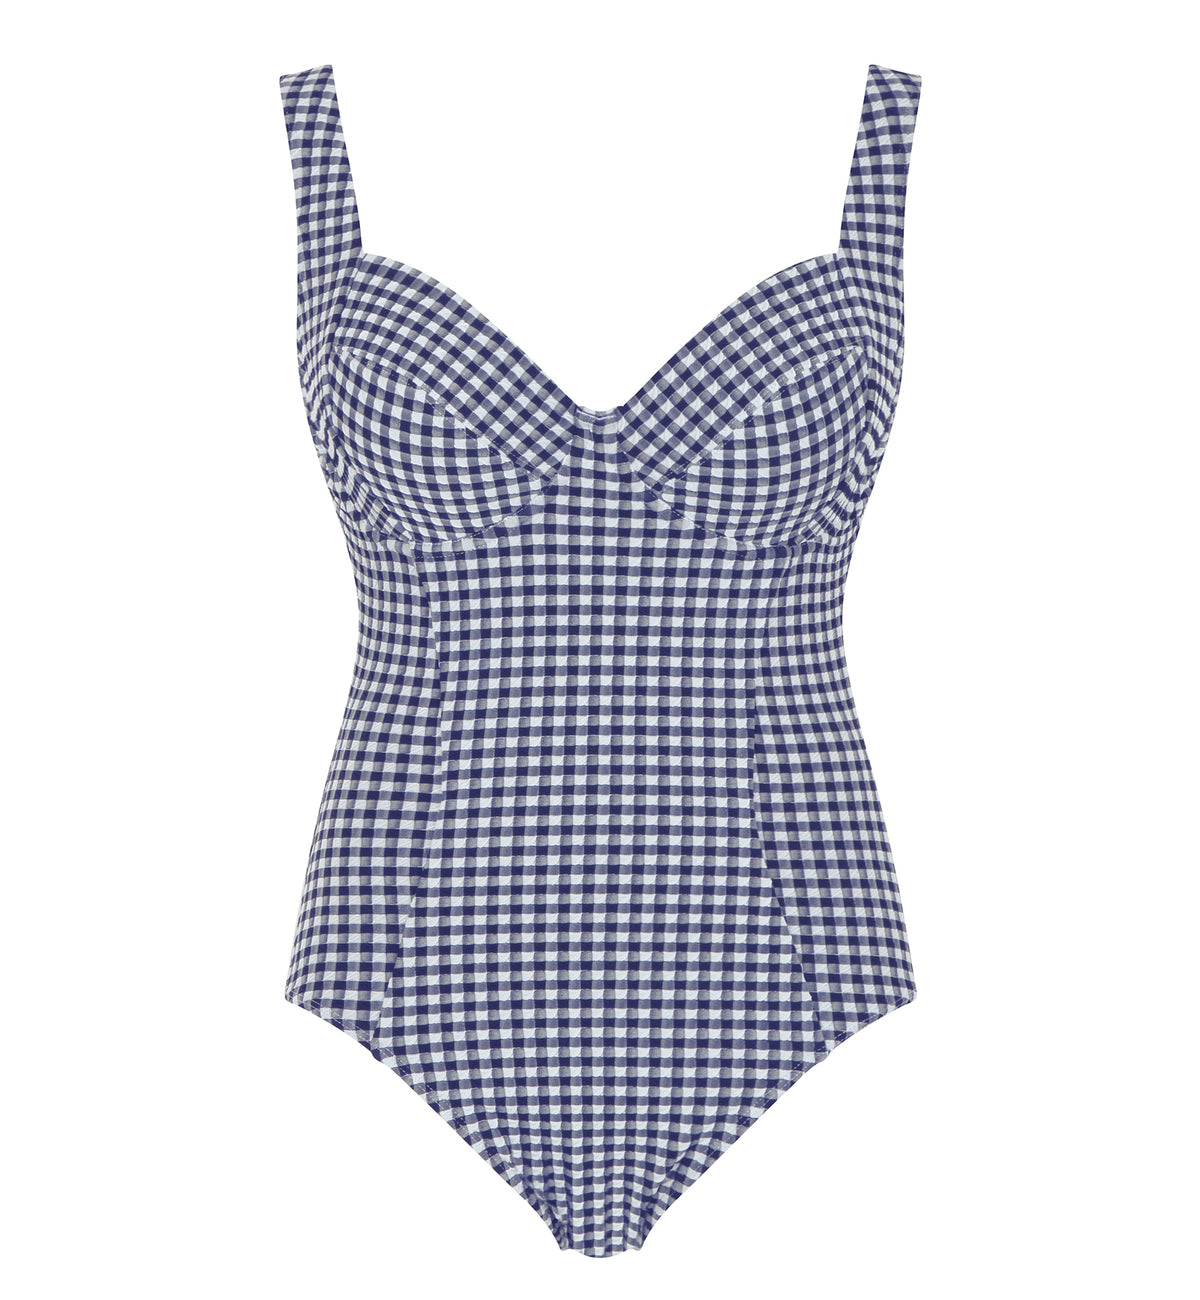 Panache Paloma Balcony Underwire Swimsuit (SW1720),30FF,Navy Gingham - Navy Gingham,30FF